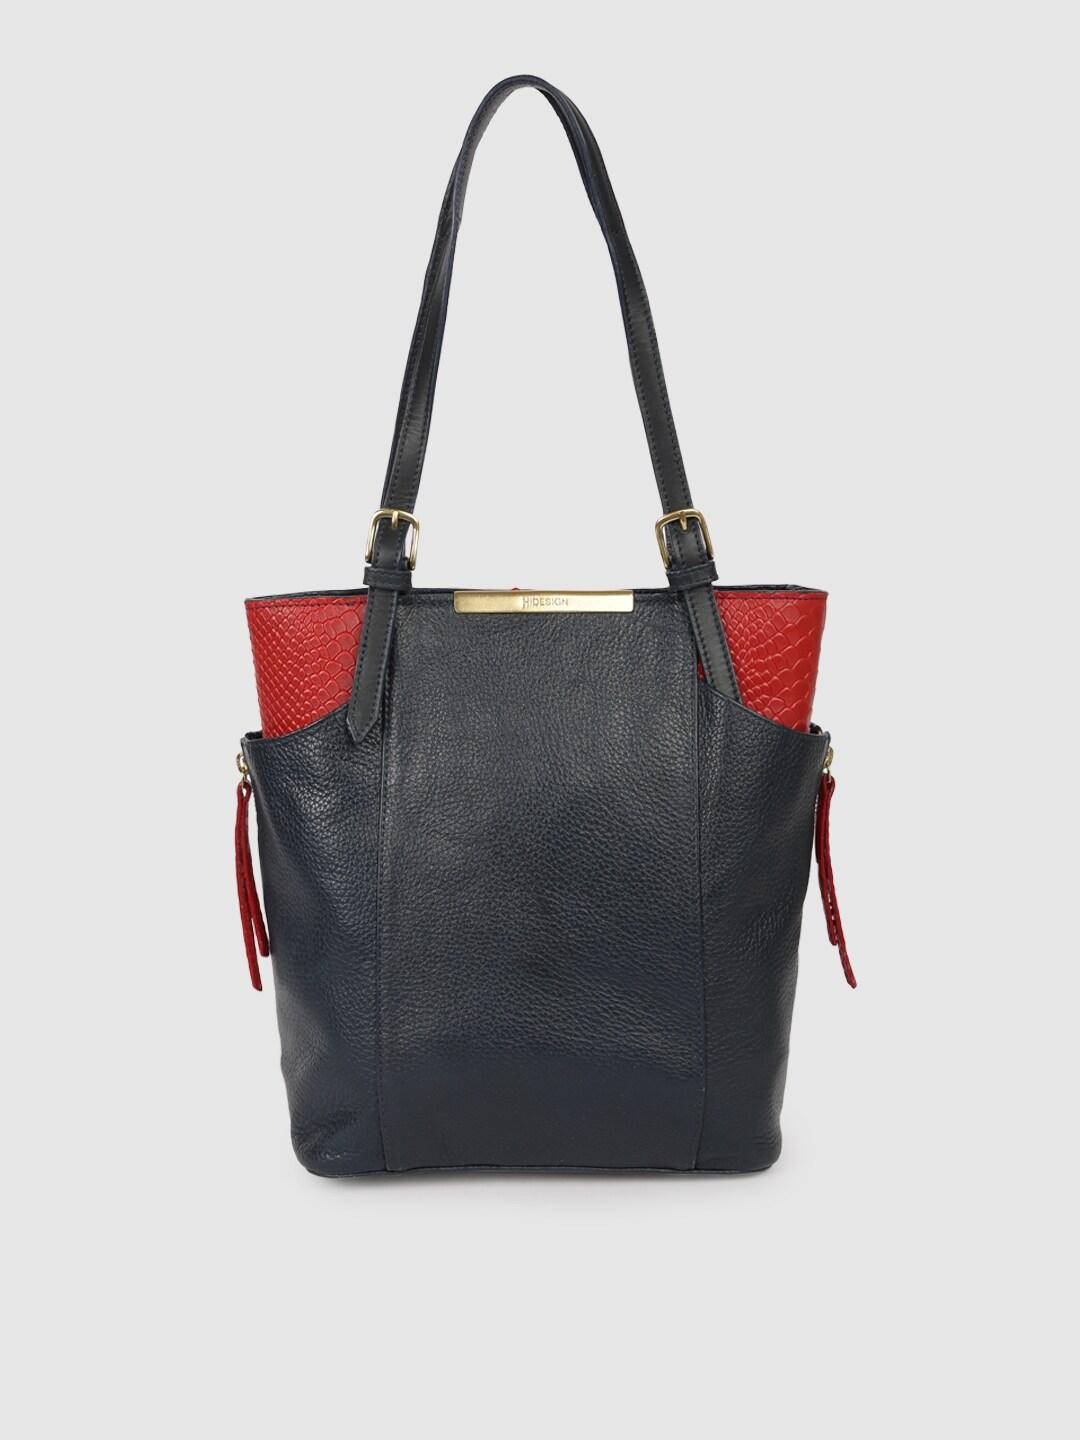 hidesign blue & red colourblocked leather tote bag